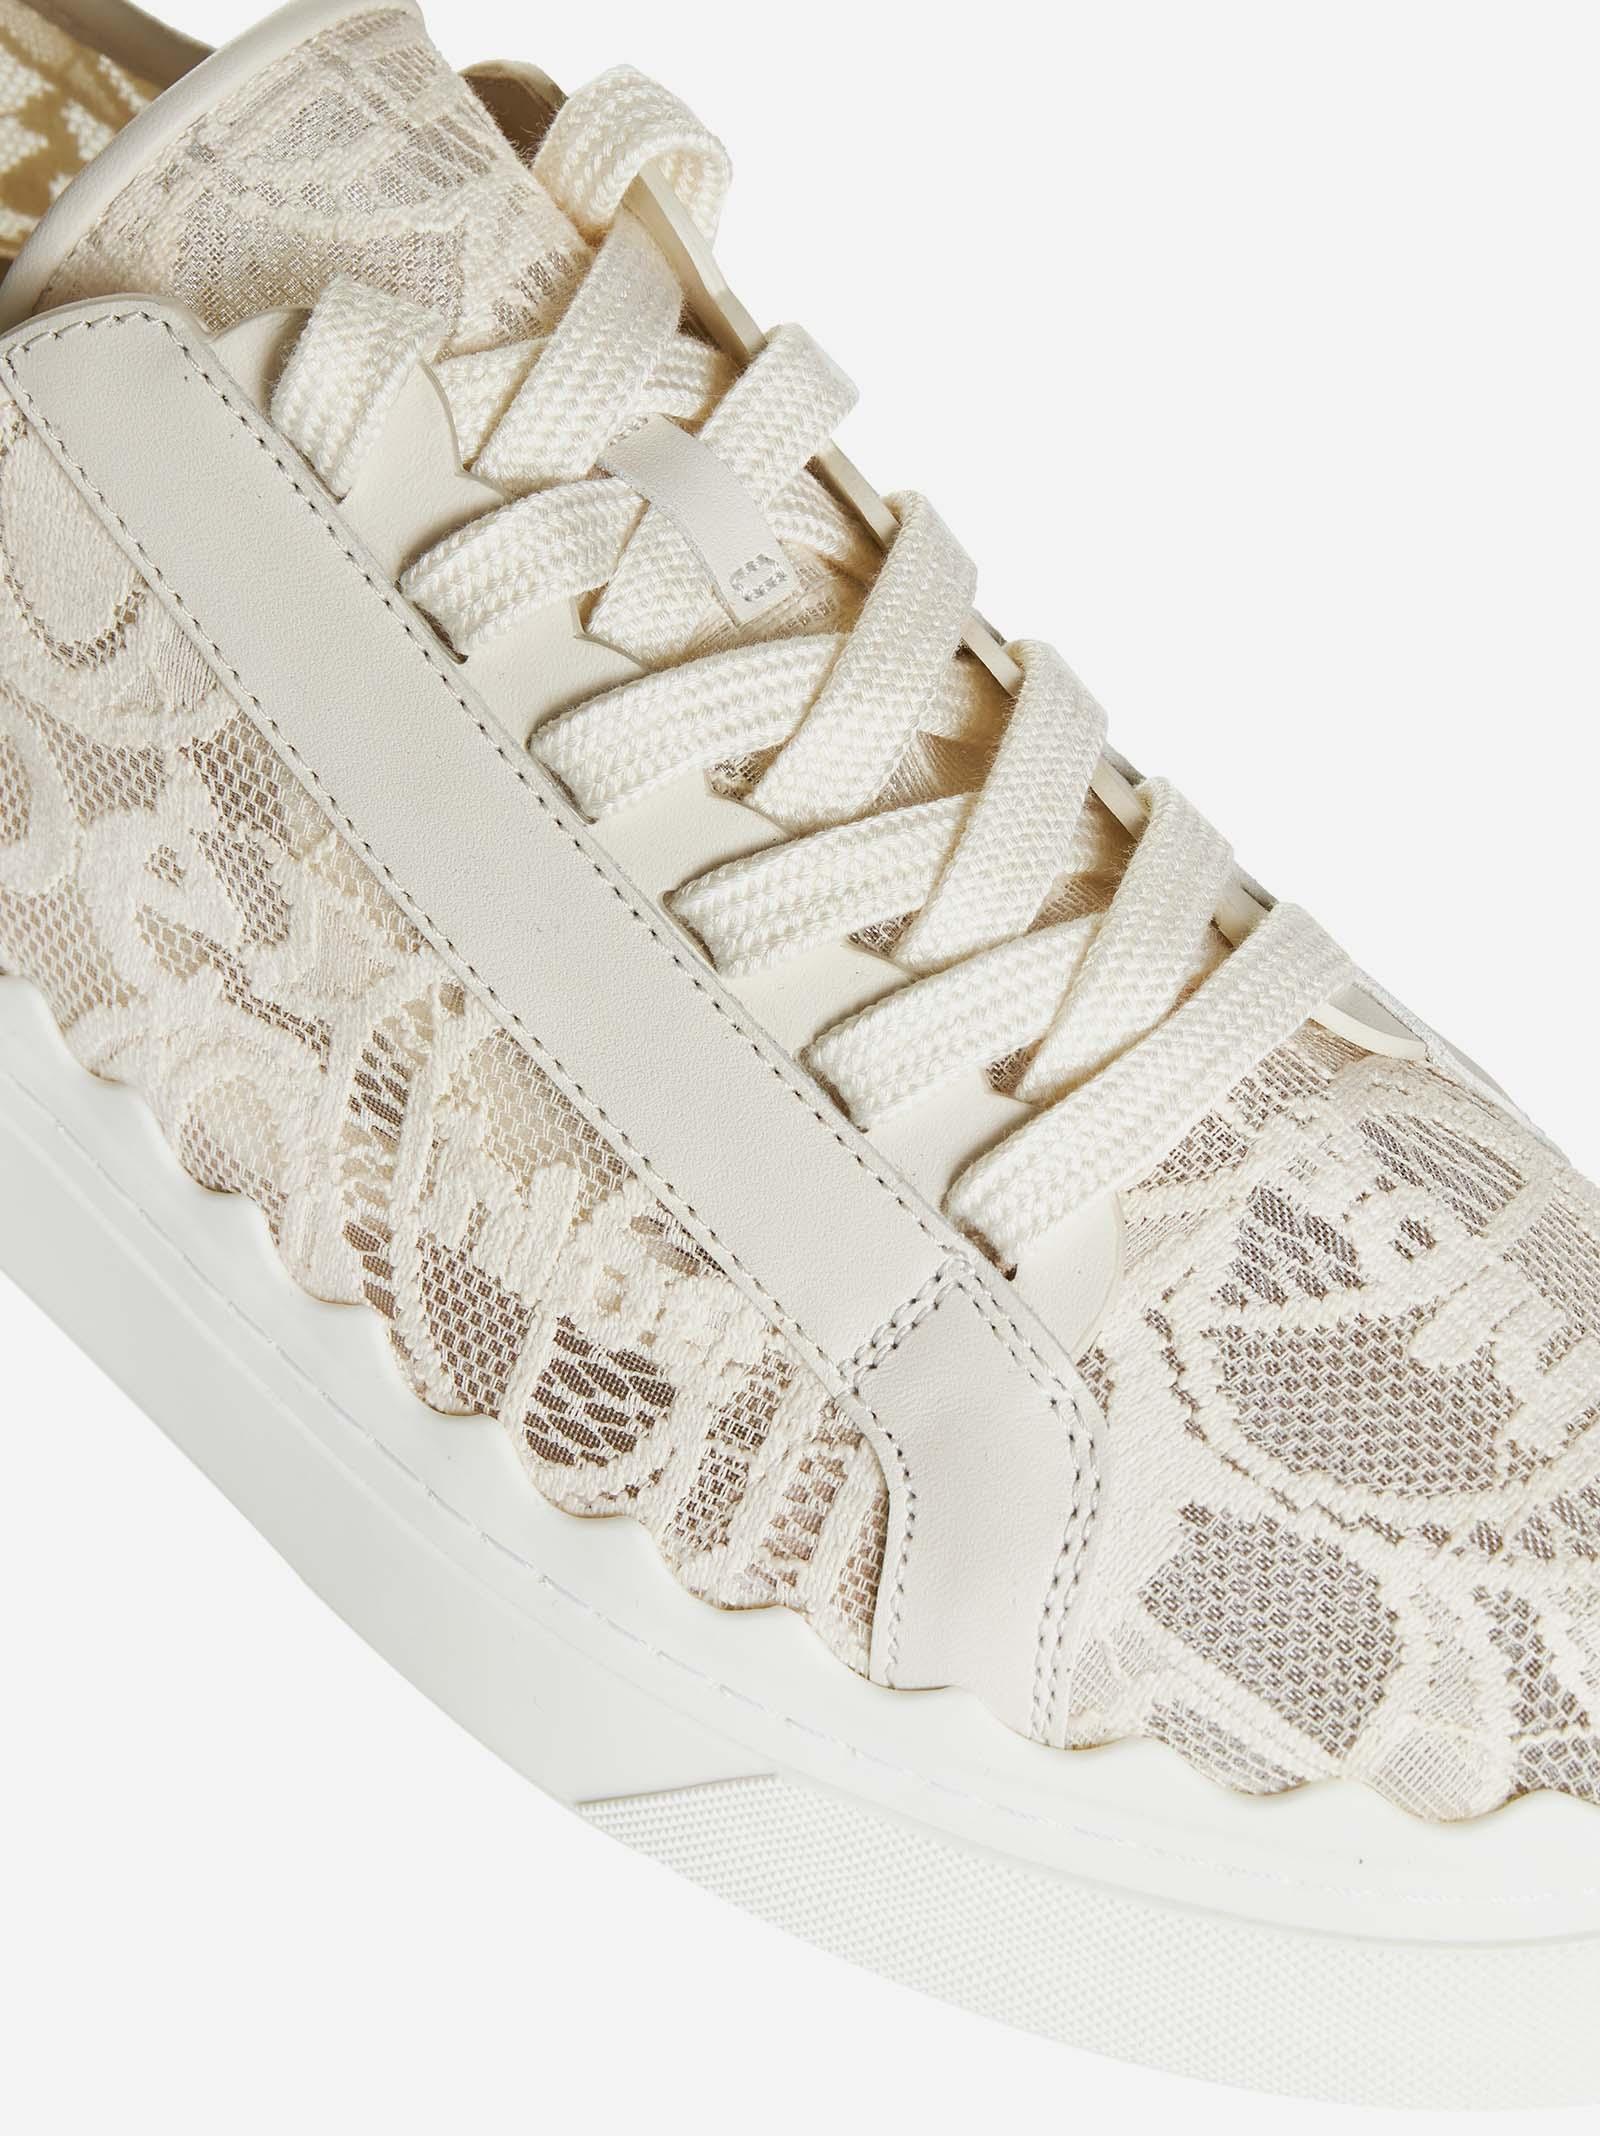 Chloé Lauren Lace Sneakers in Natural | Lyst